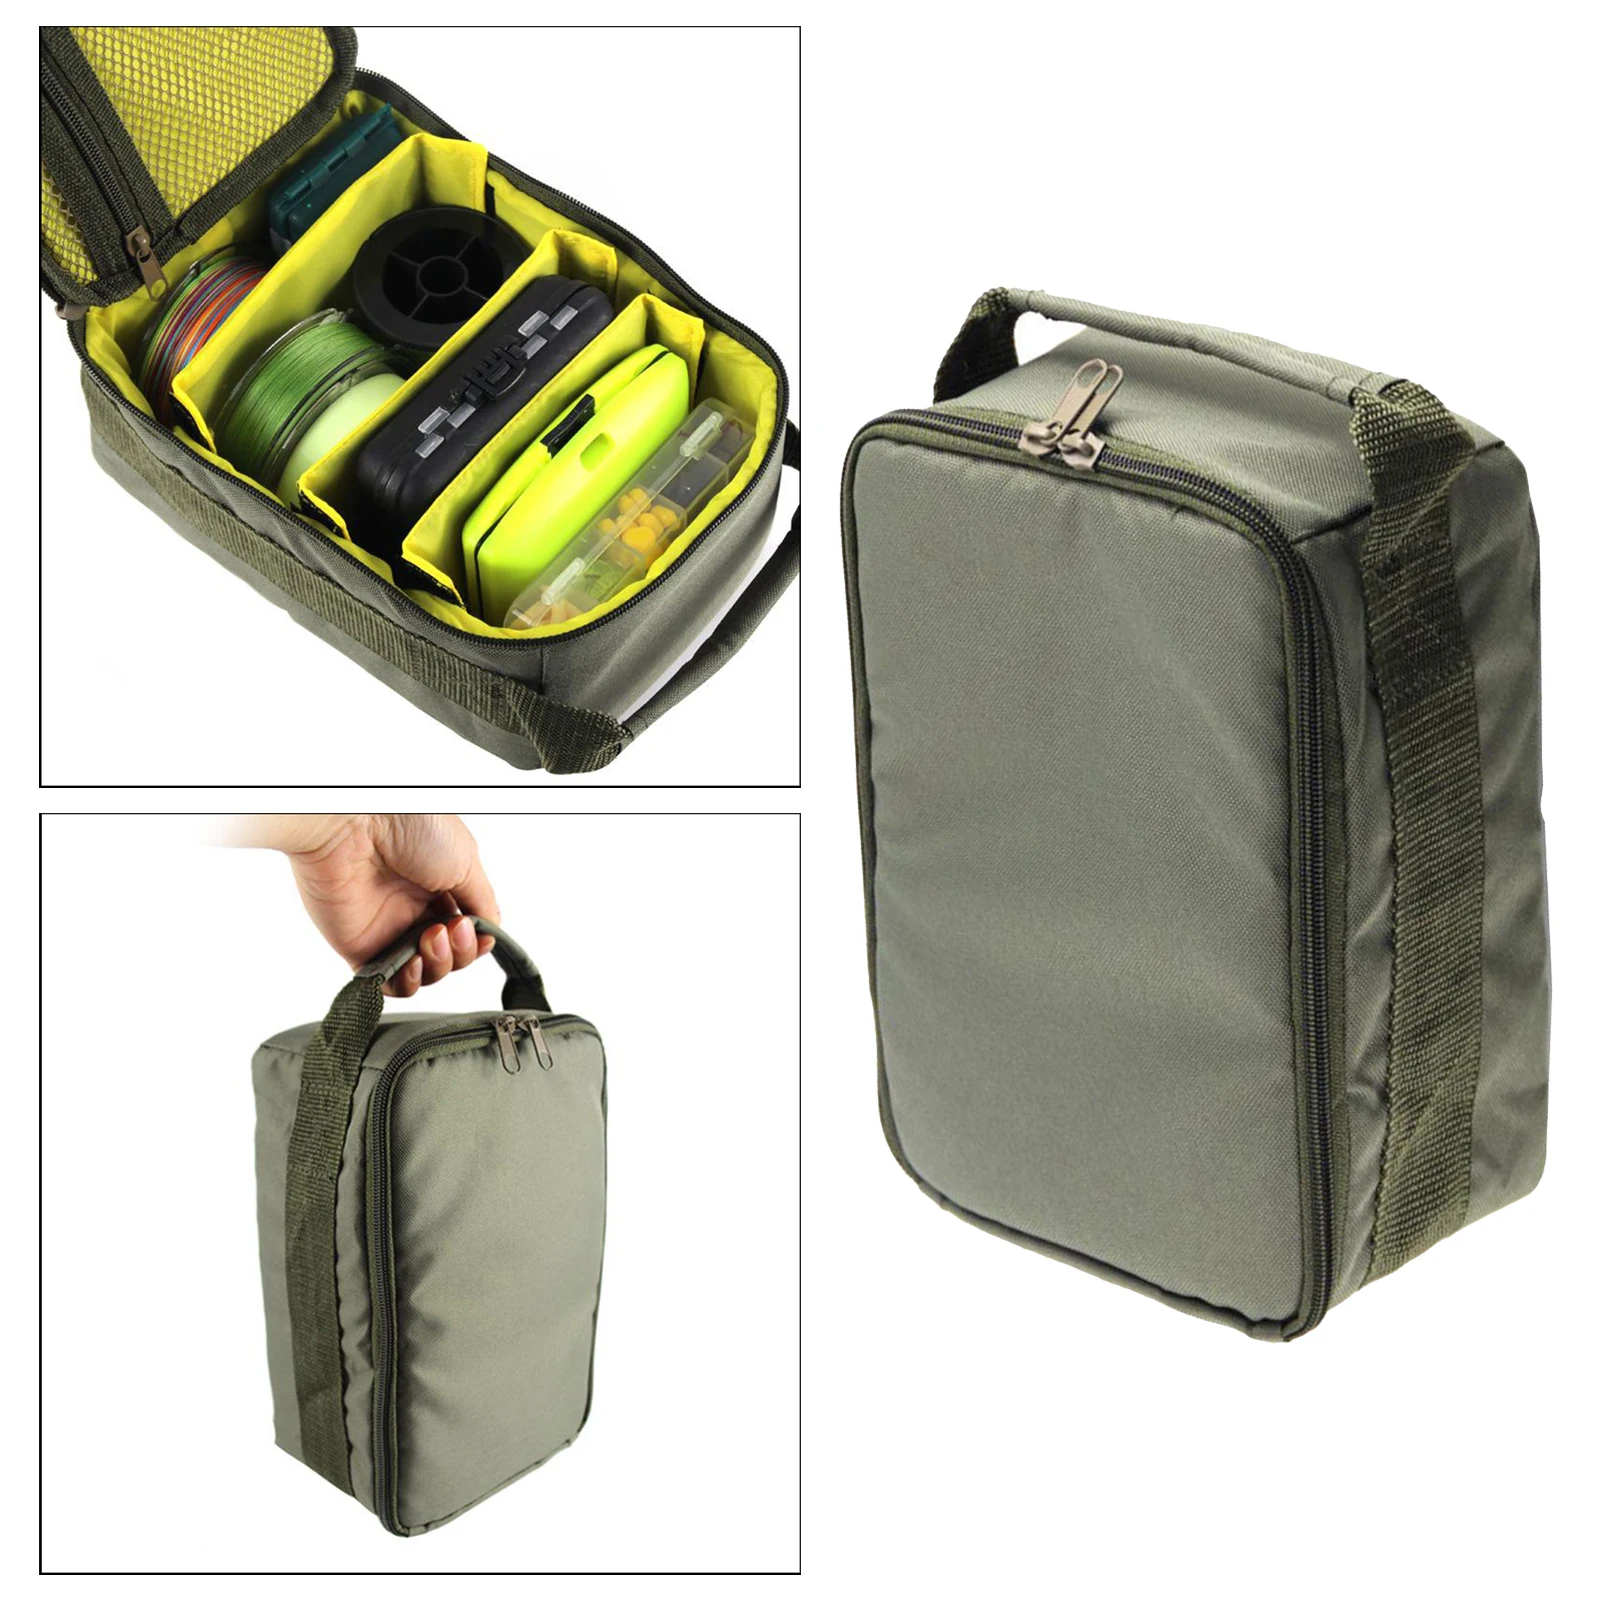 Fishing Tackle Bag Pack Fishing Reel Lure Gears Storage Organizer Pouch Case